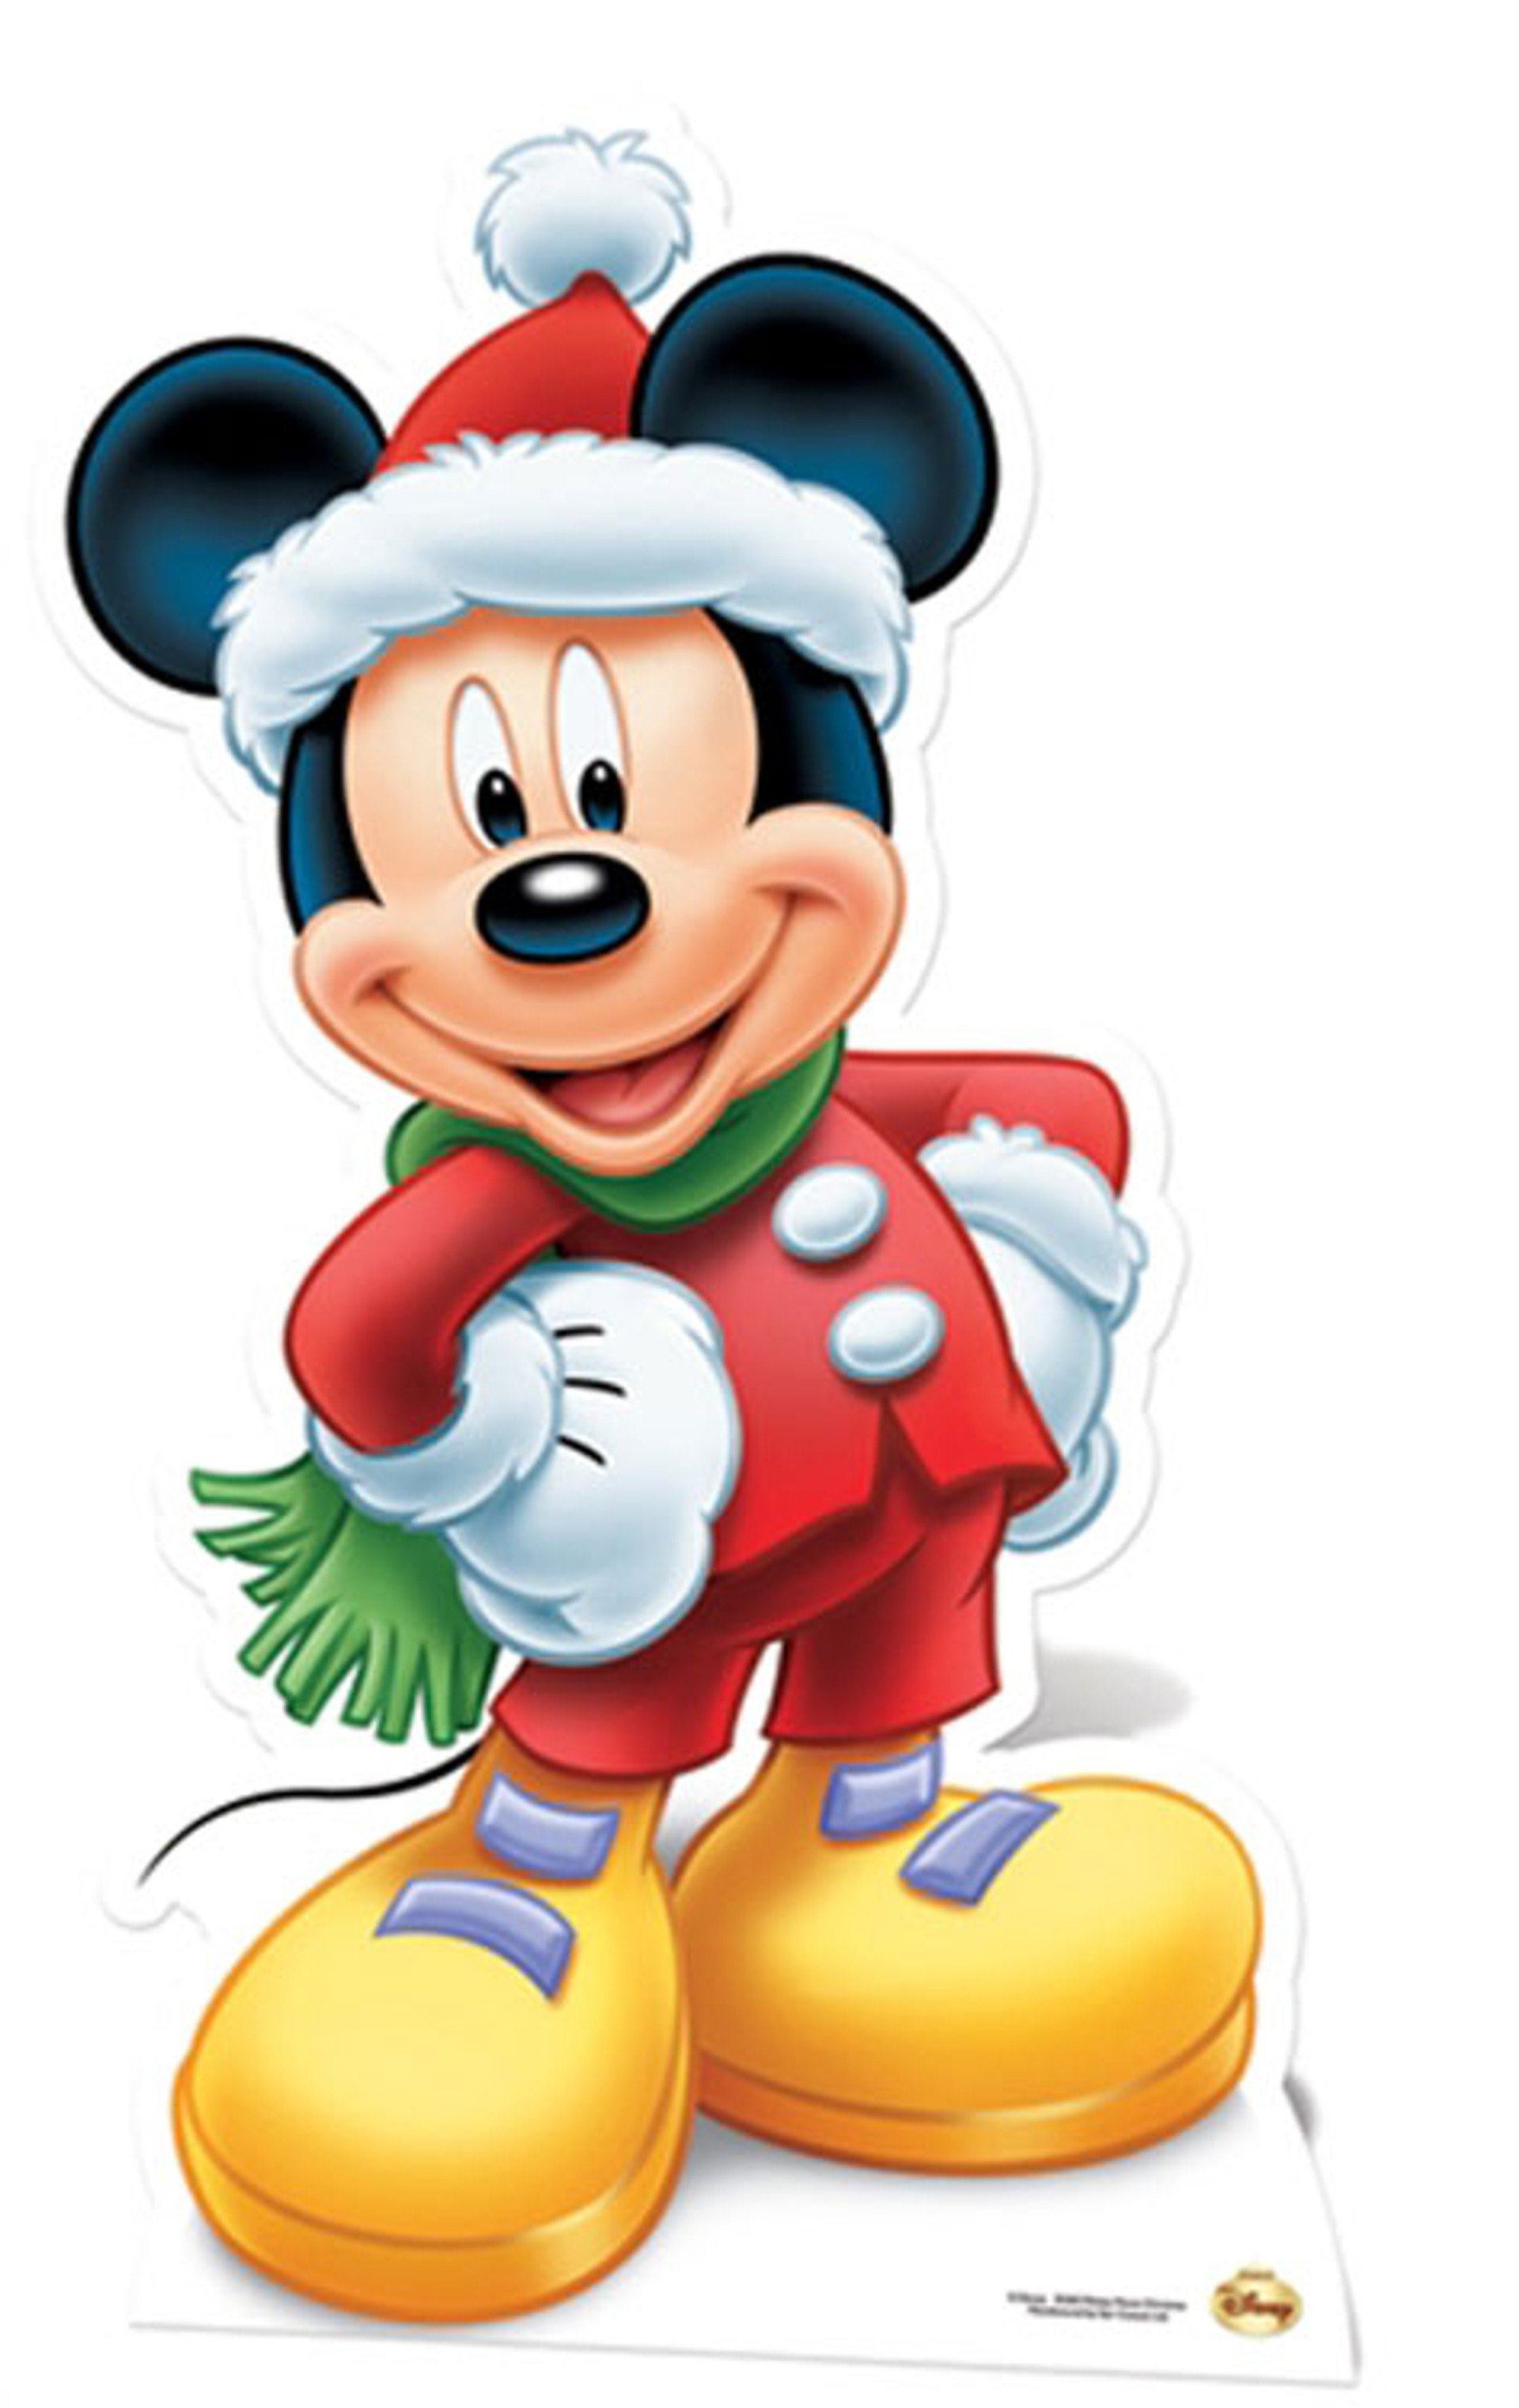 Lifesize Cardboard Cutout Of Mickey Mouse And Minnie Mouse